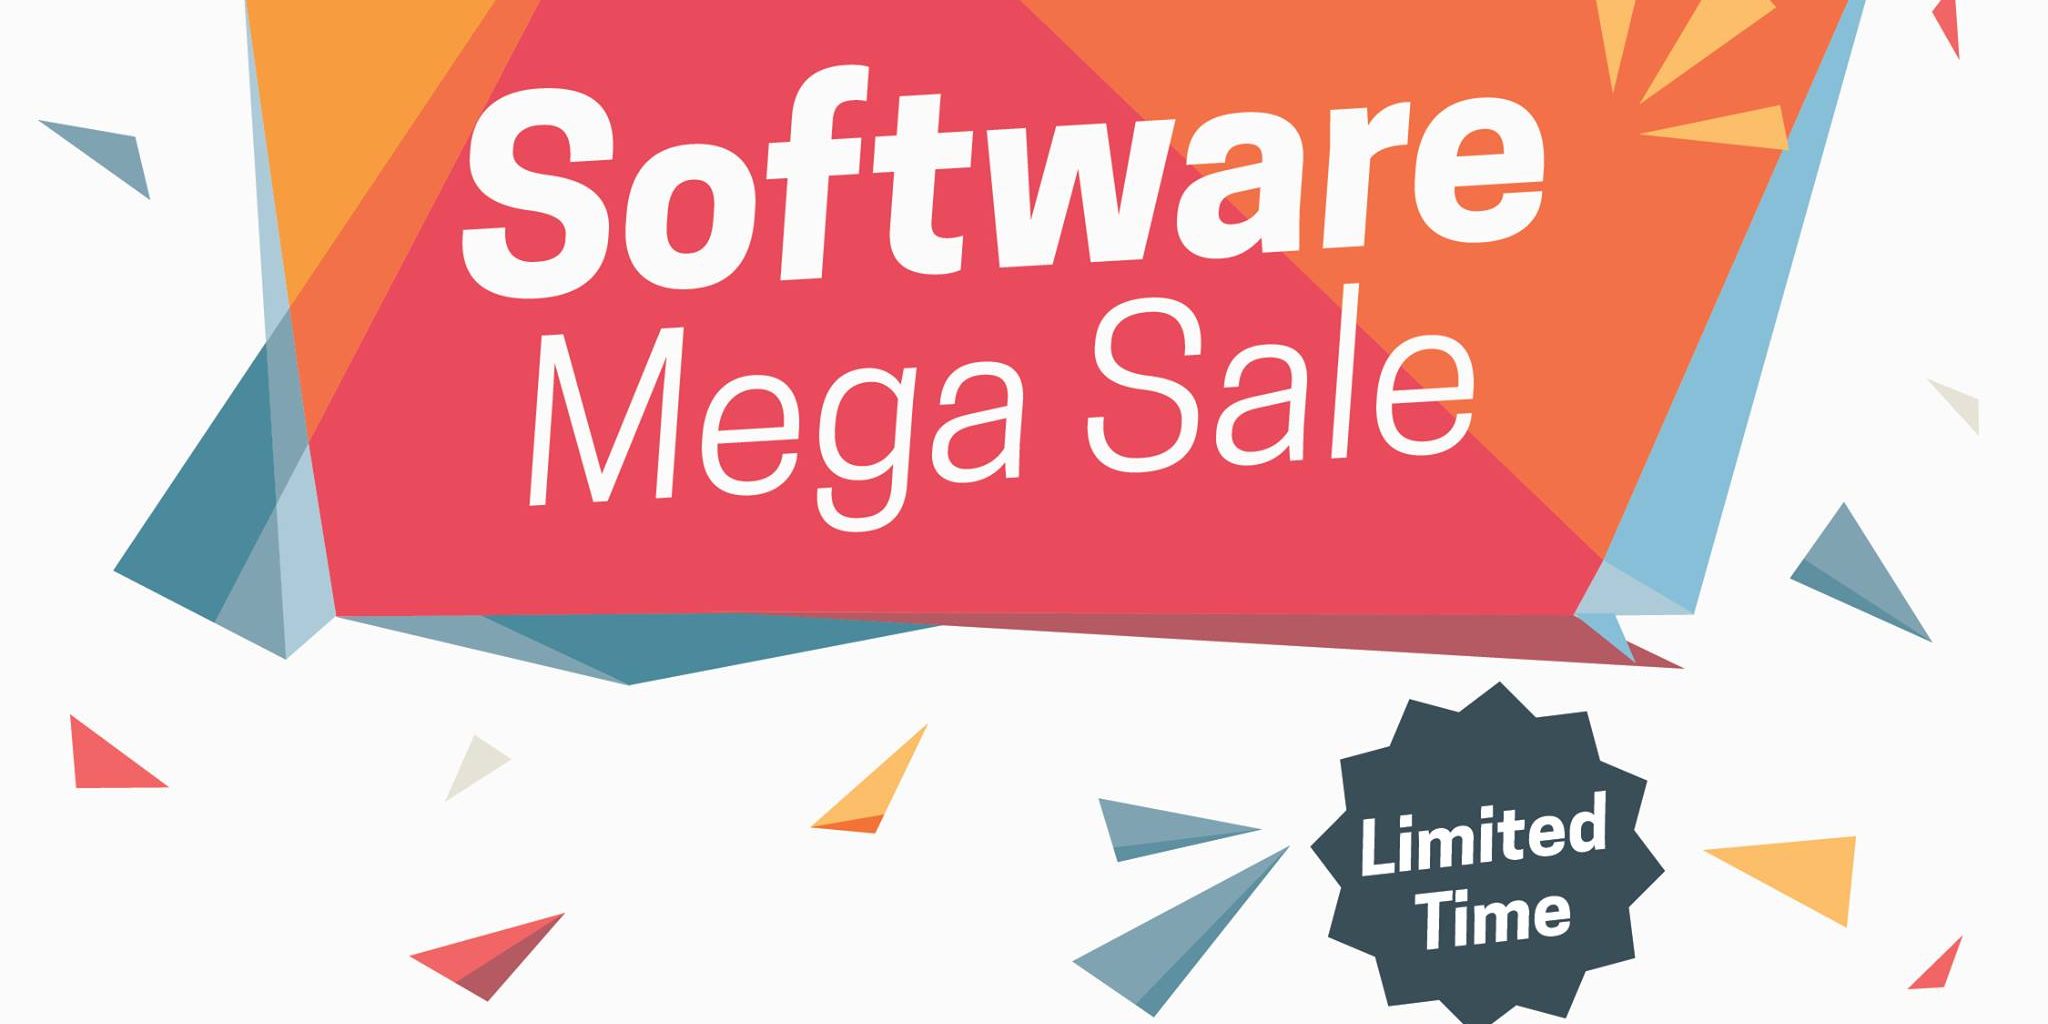 TOG Singapore Software Mega Sale at Marina Square Outlet for a Limited Time